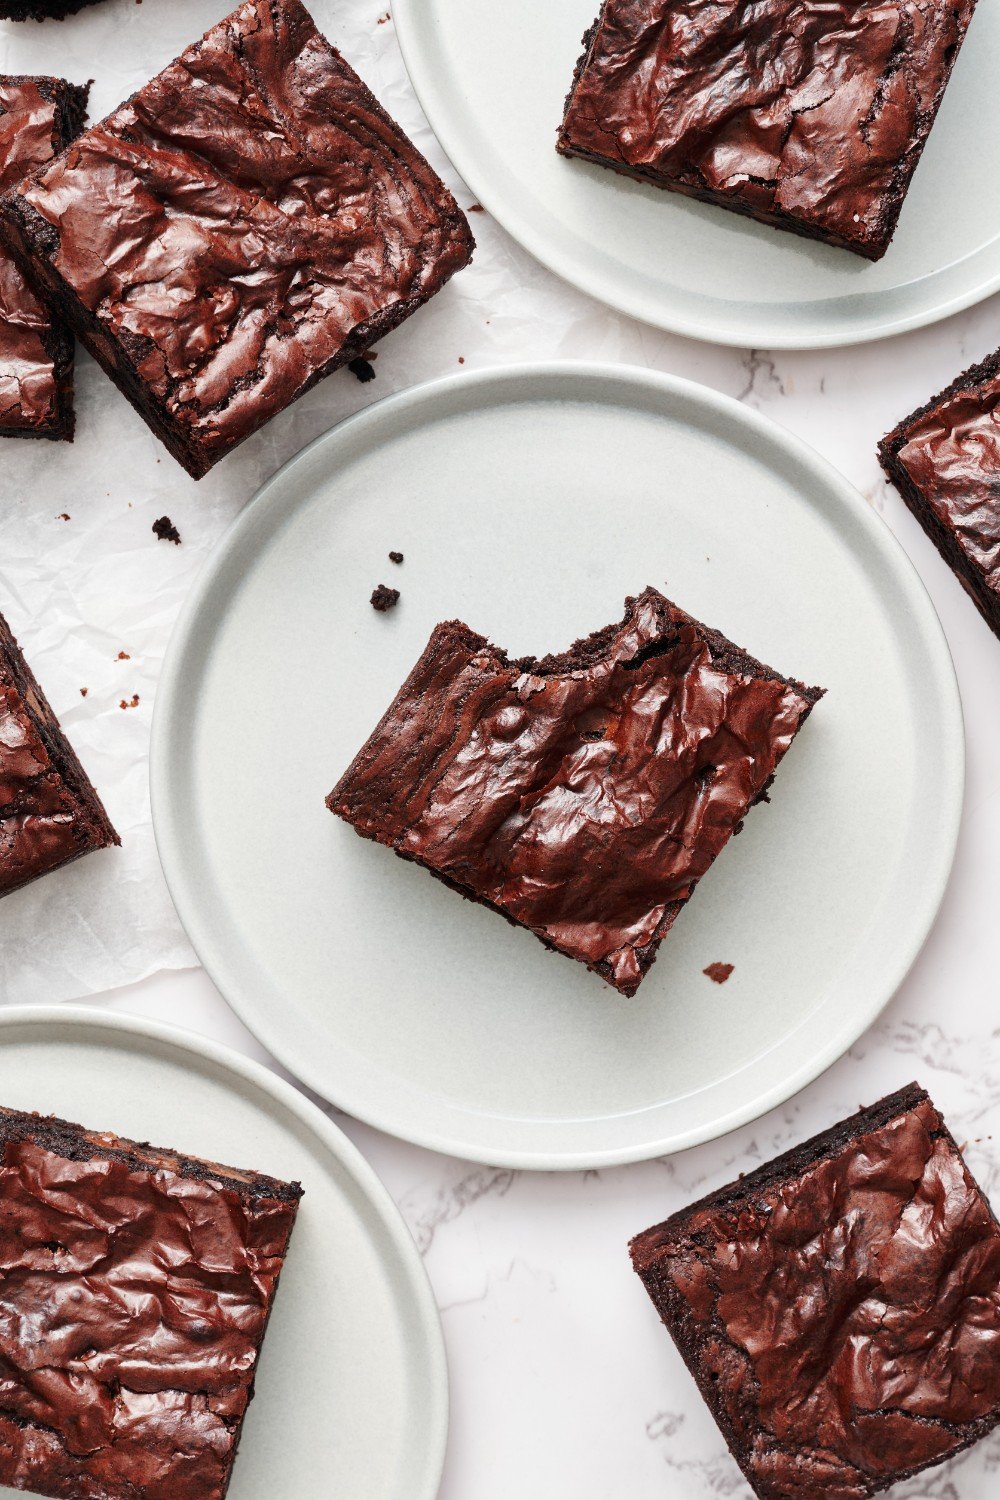 slices of chewy brownies on white plates, ready to serve.